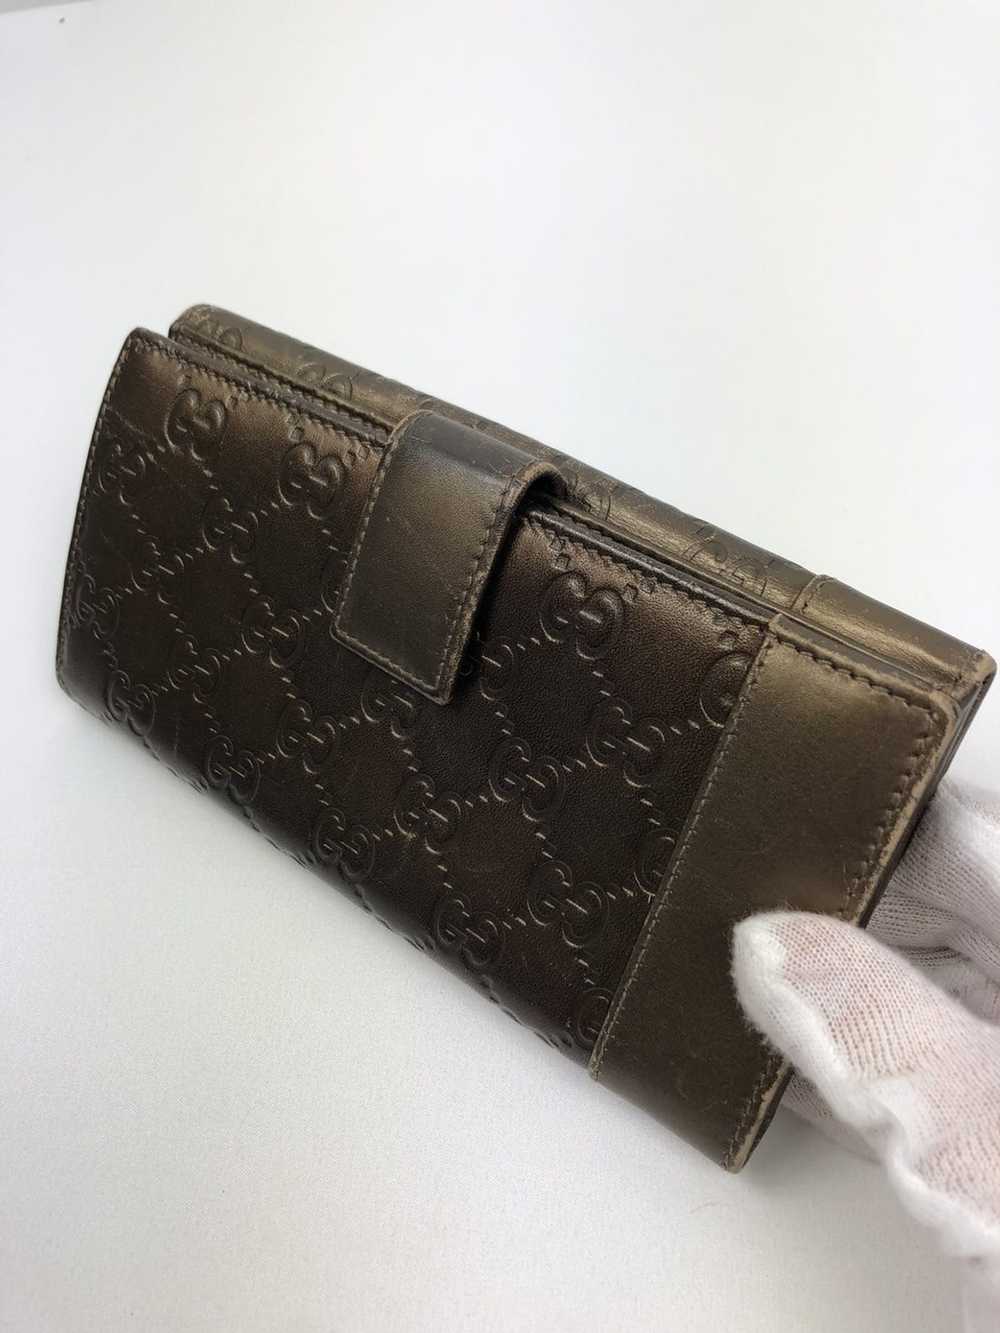 Gucci Gucci gg guccissima leather long wallet - image 2